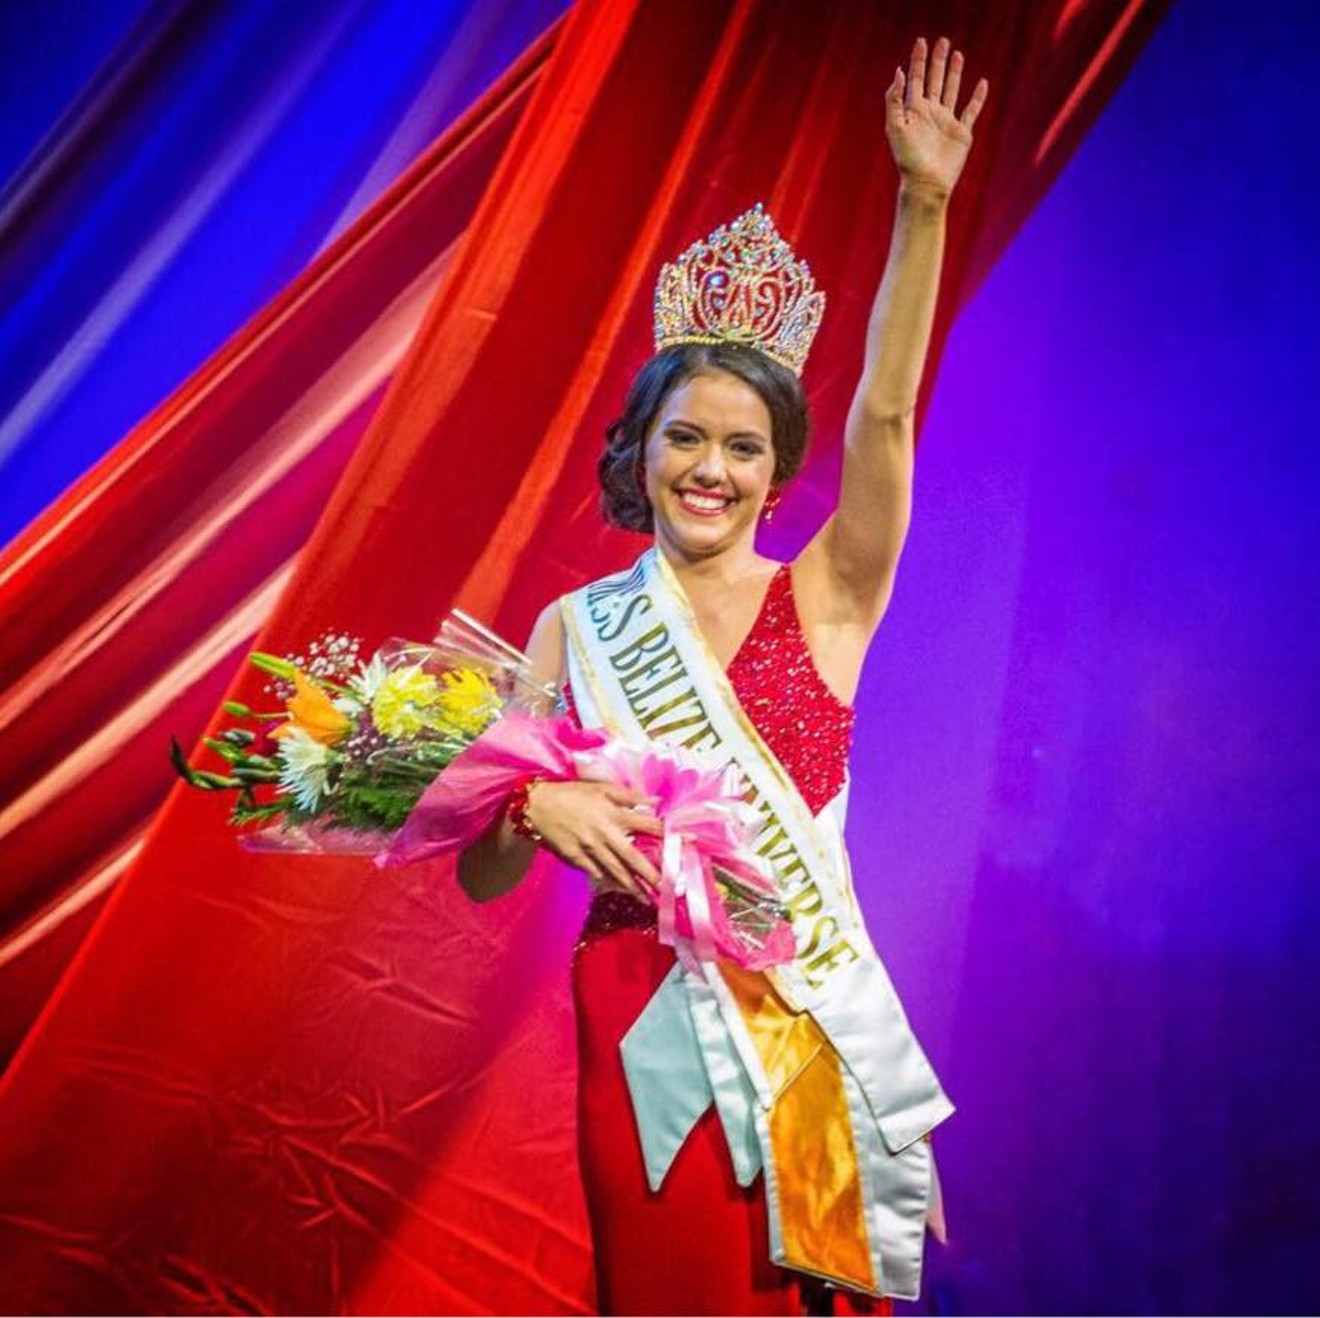 Rebecca Rath after being crowned Miss Belize.